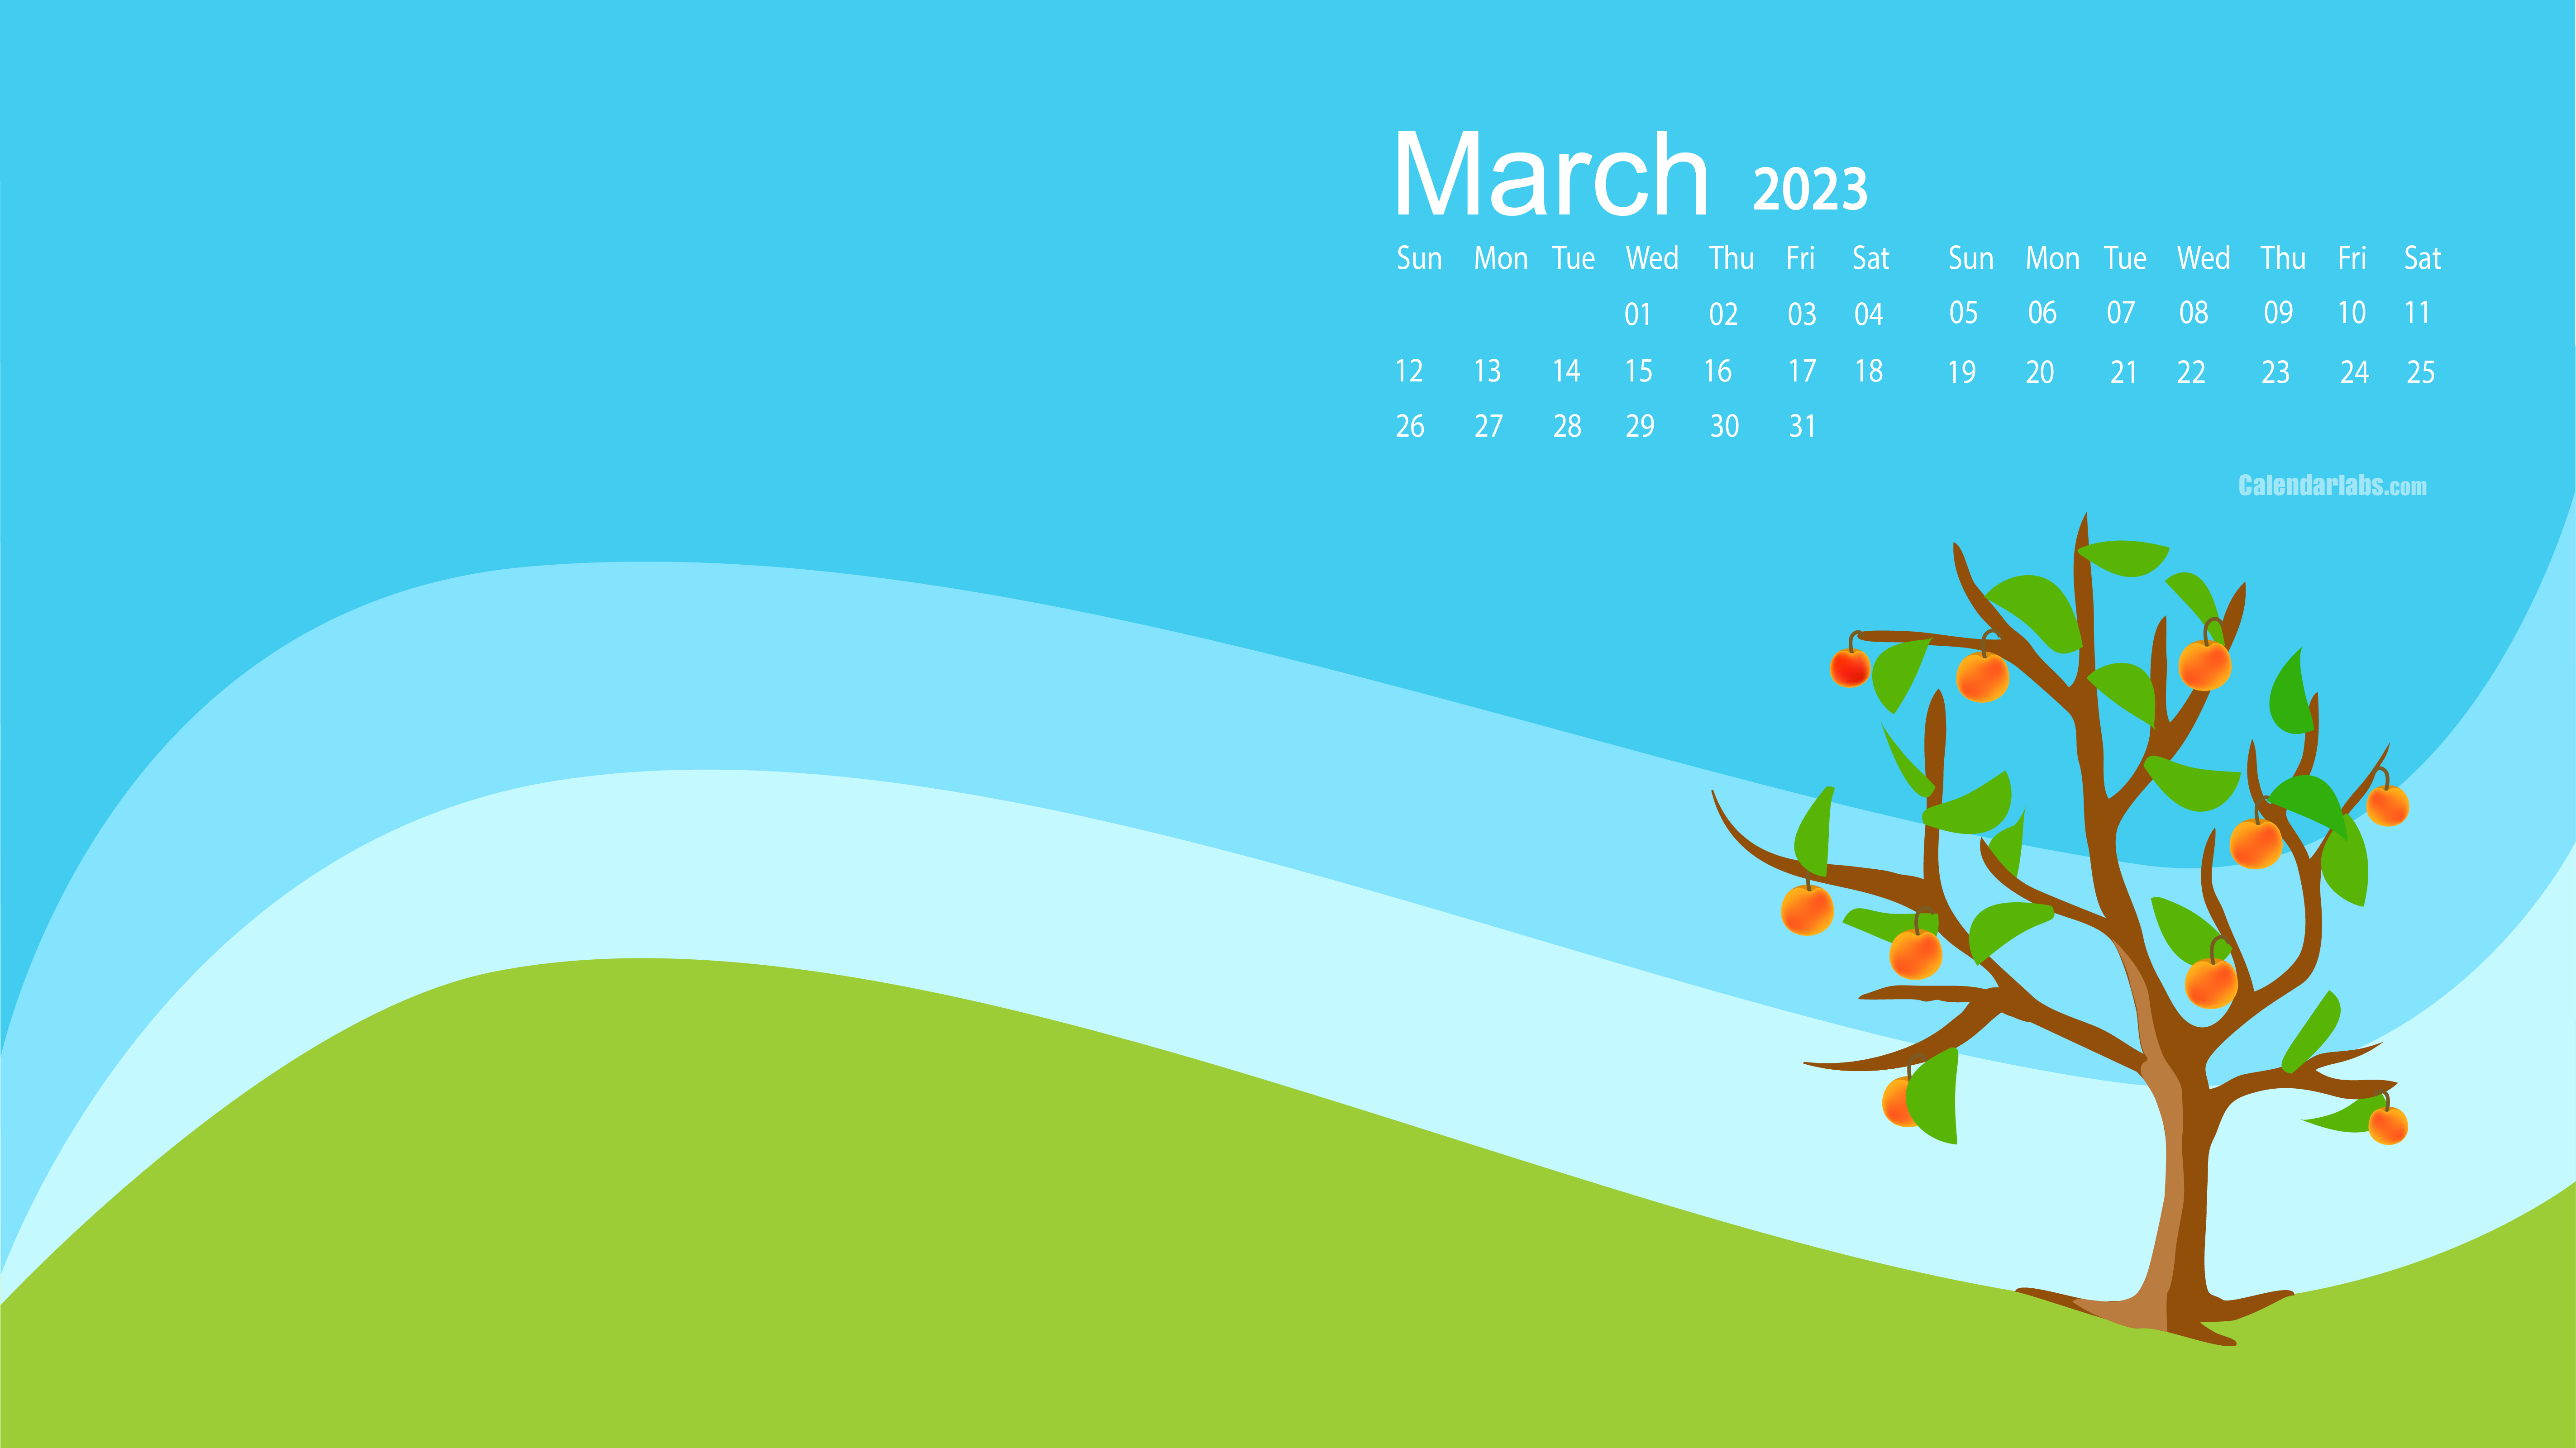 Our March Wallpaper is Here